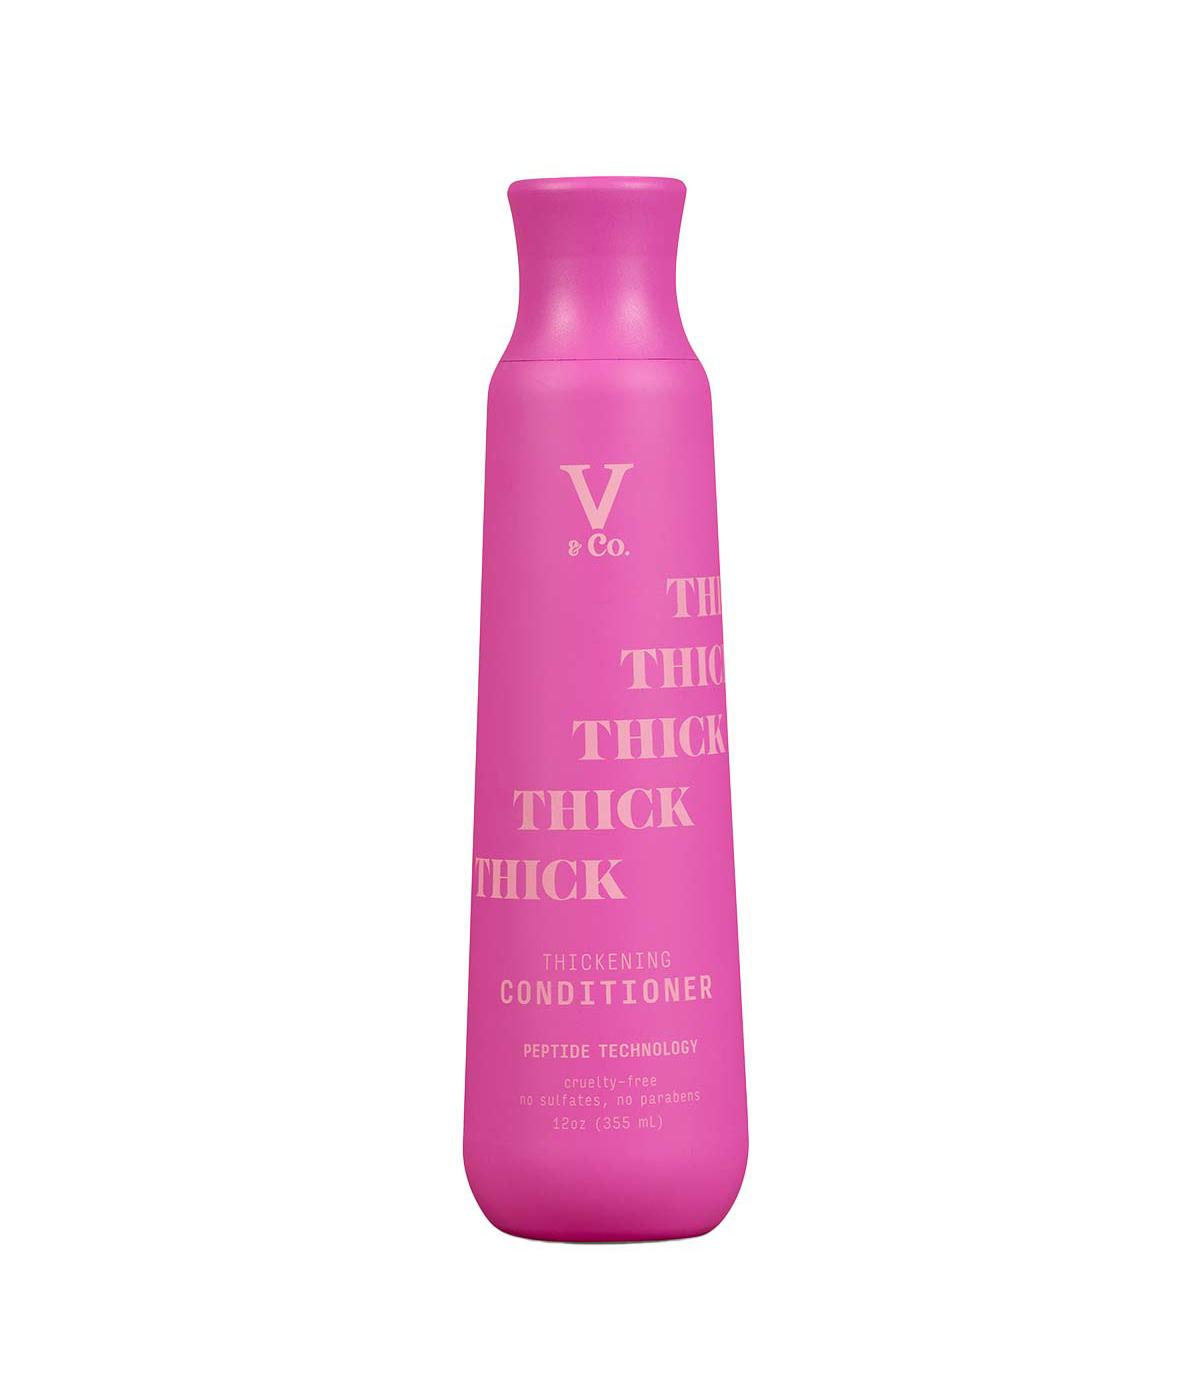 V&Co. Thickening Conditioner; image 1 of 2